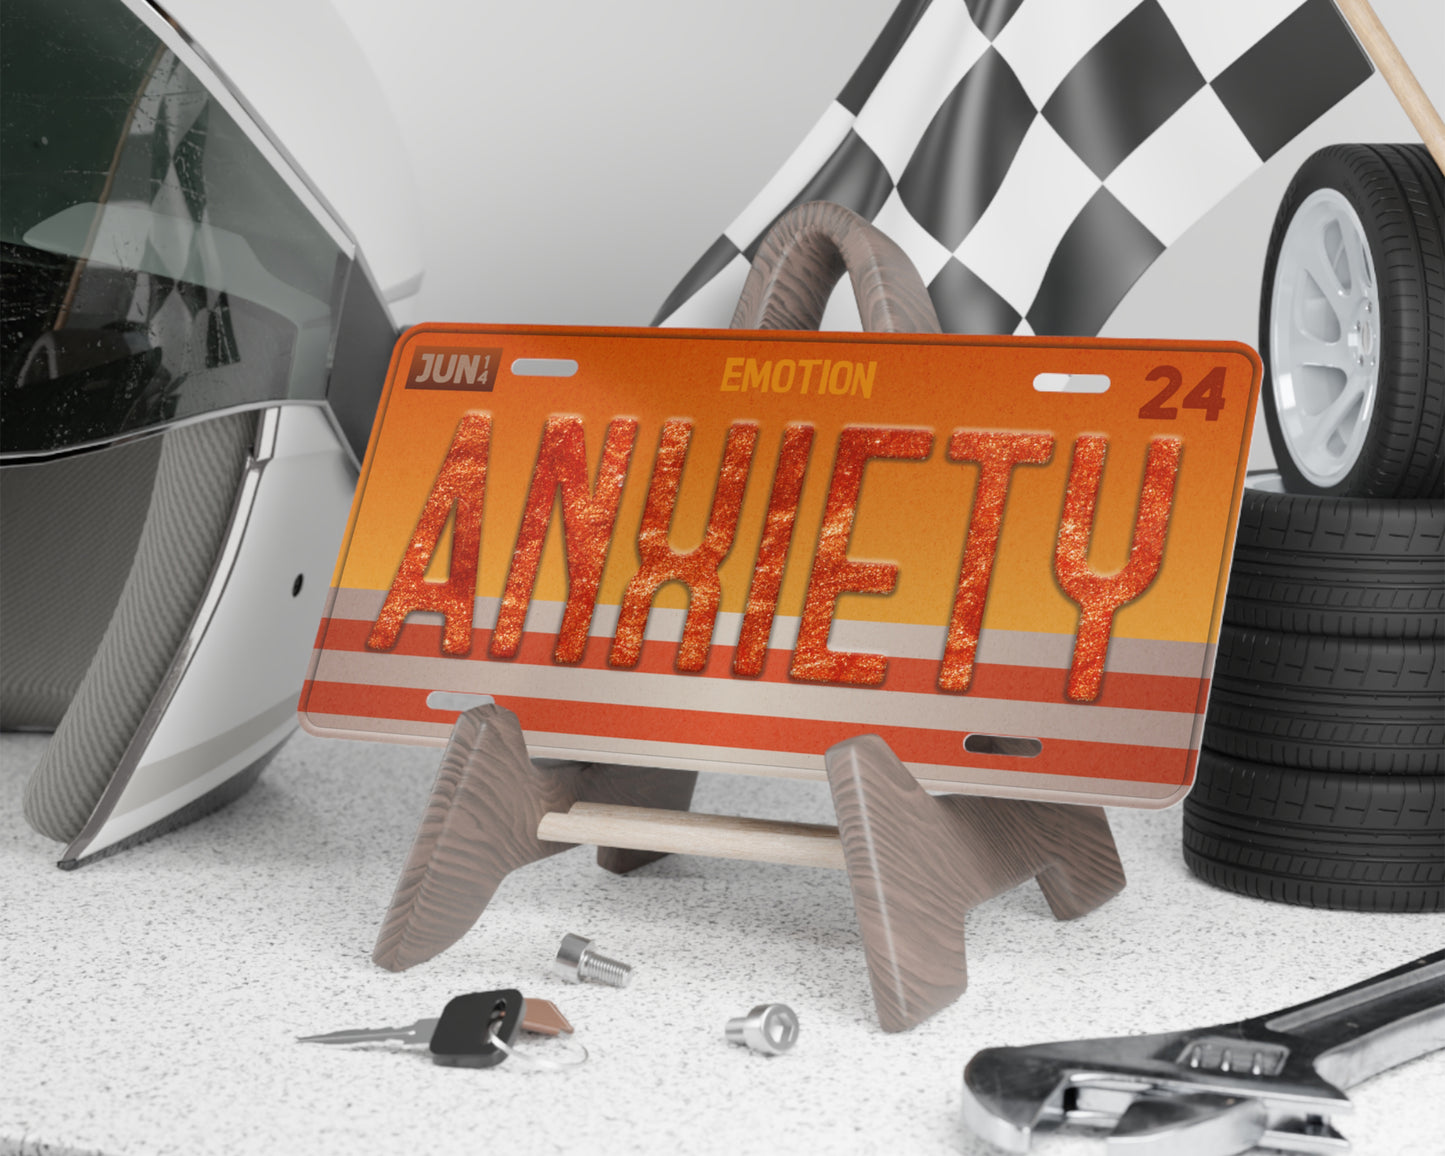 Anxiety emotion license plate